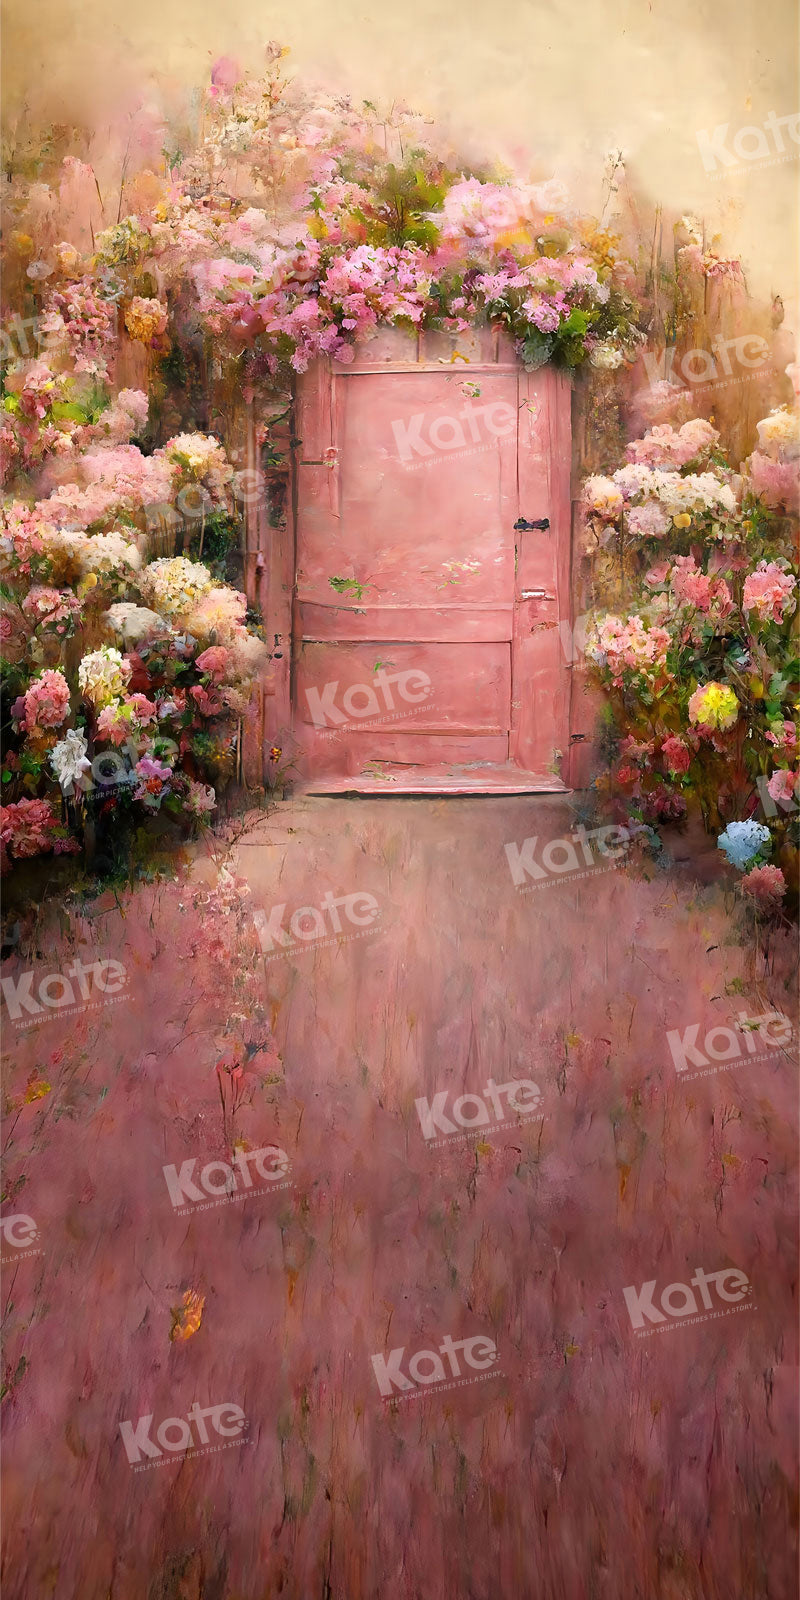 Kate Sweep Spring Blooming Flowers Door Backdrop for Photography